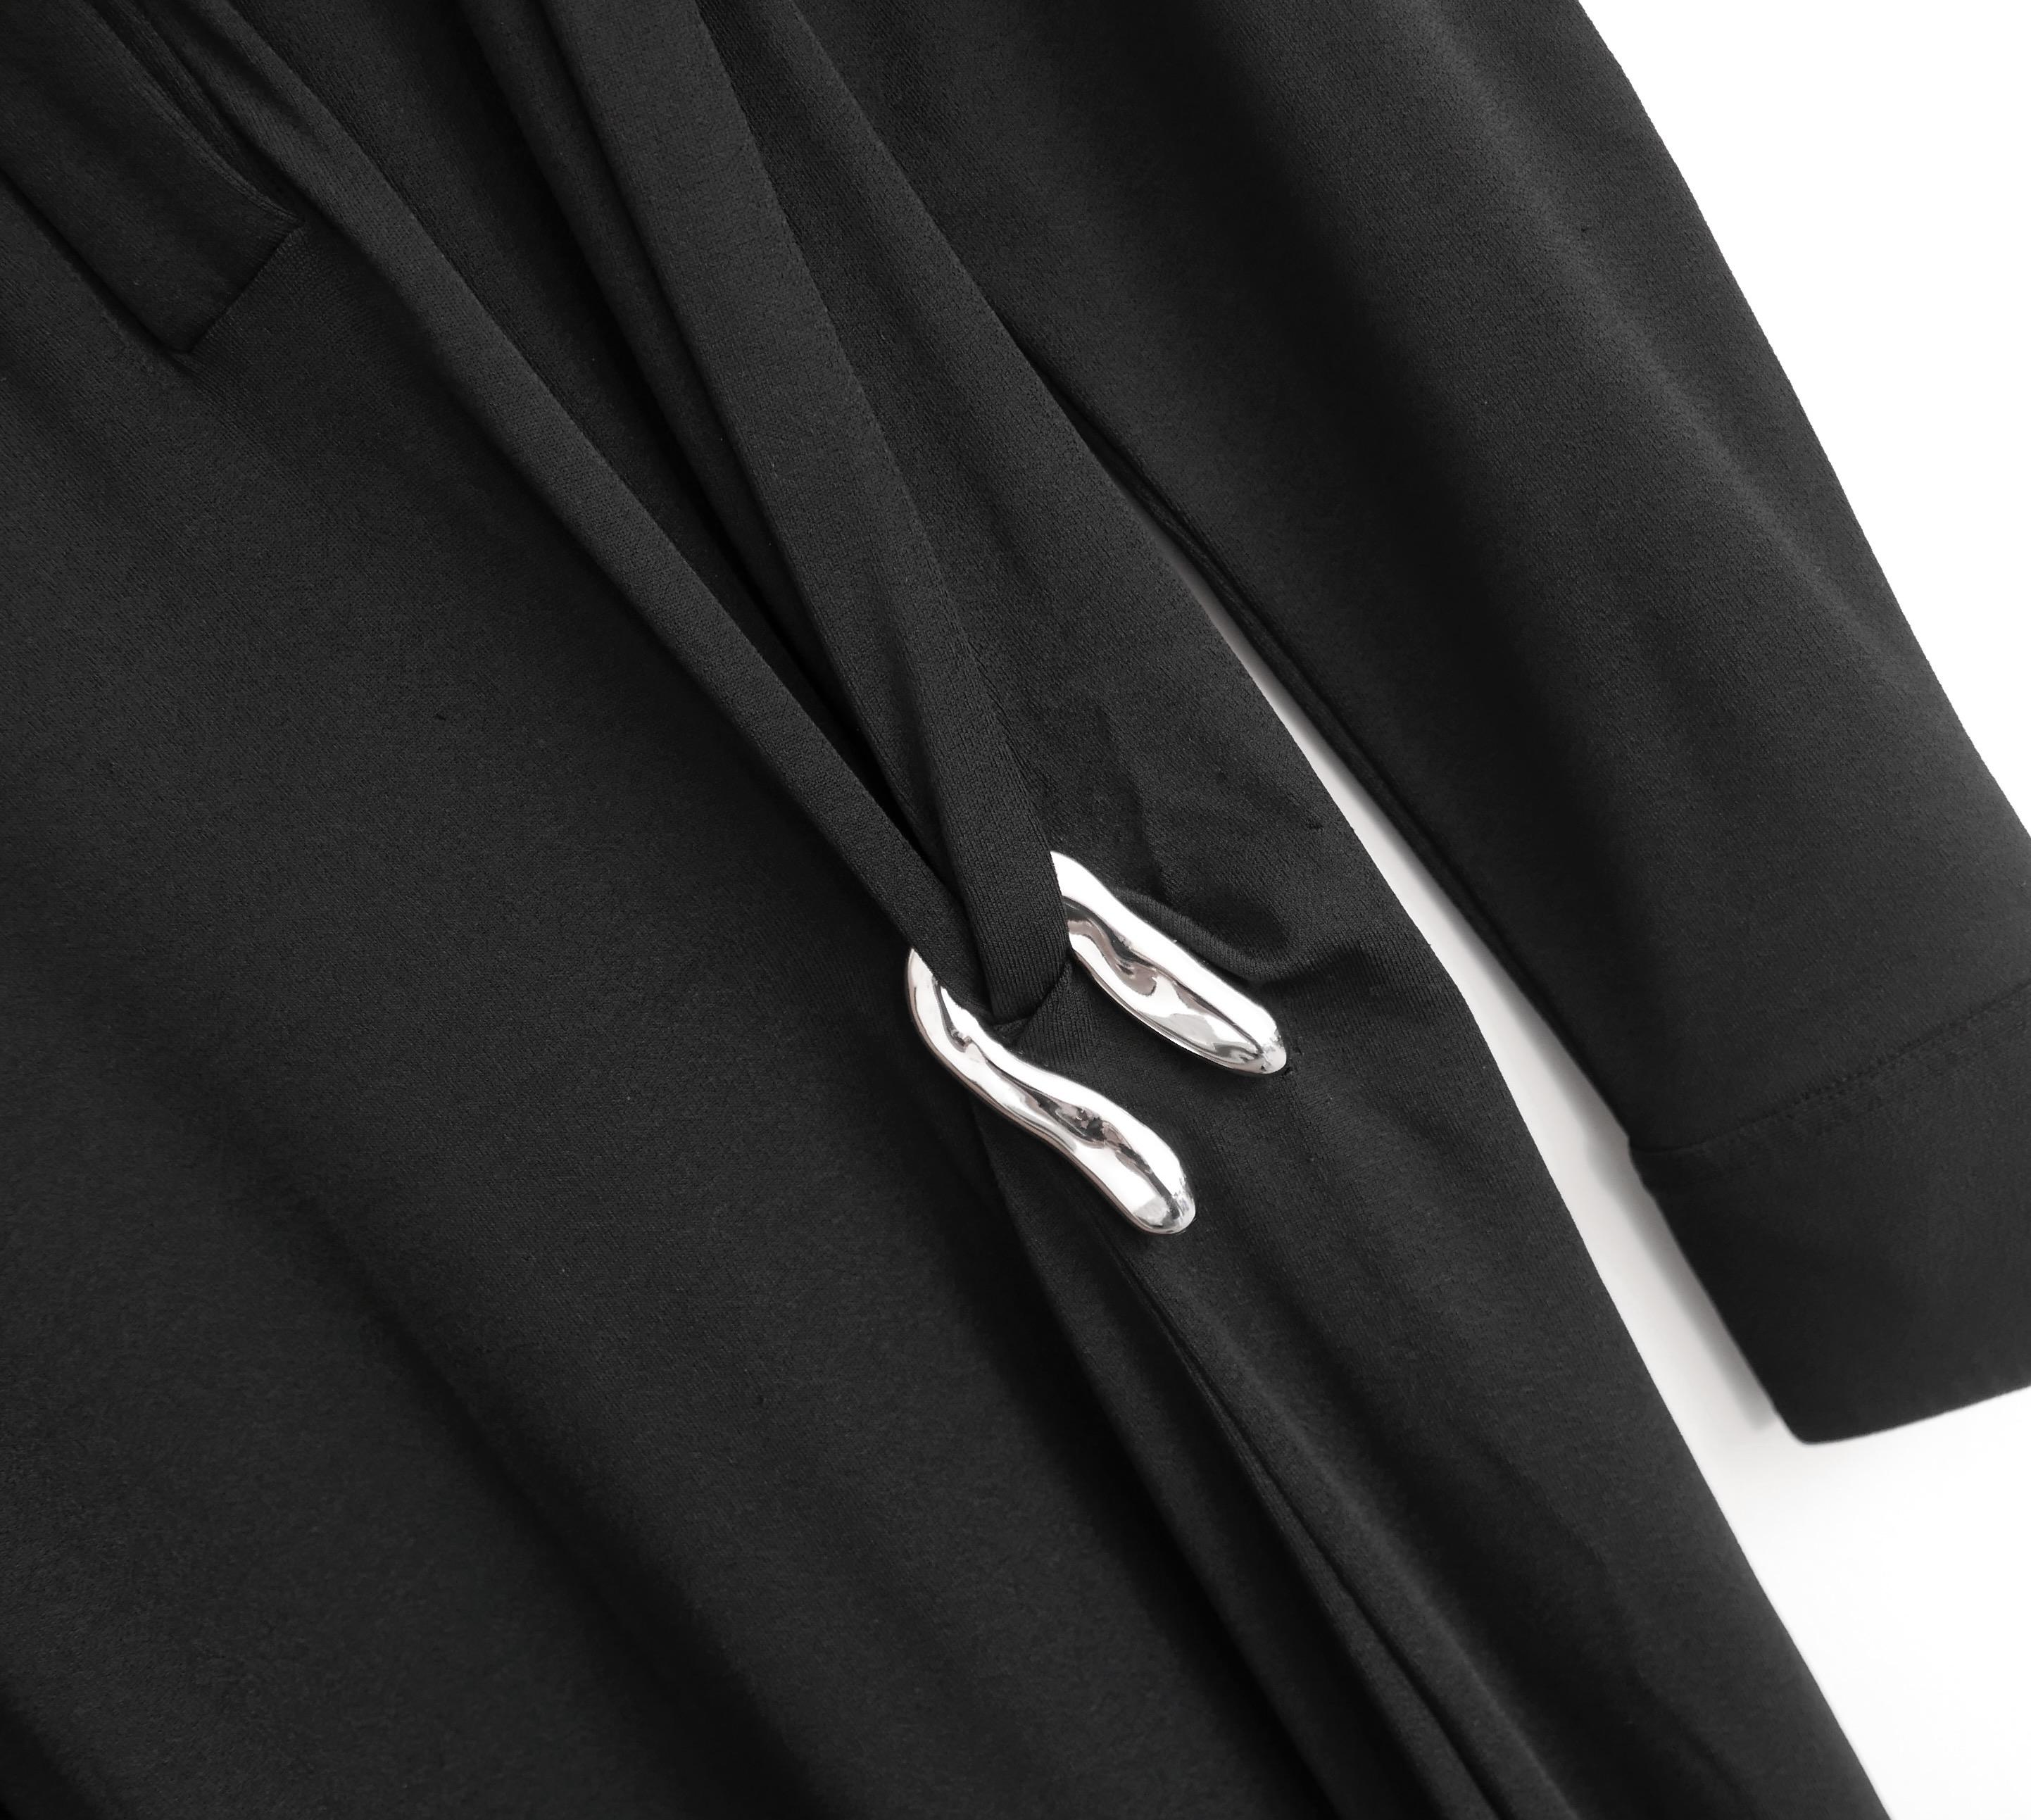 Stunning minimalist Bottega Veneta Hardware Detail Shirt Dress from the Pre-Spring 2020 Collection. bought for £1595 and worn once. Crafted in Italy from heavy black 'dense crepe' stretch-jersey (91% Viscose, 7% polyamide, 2% Elastane) with silver